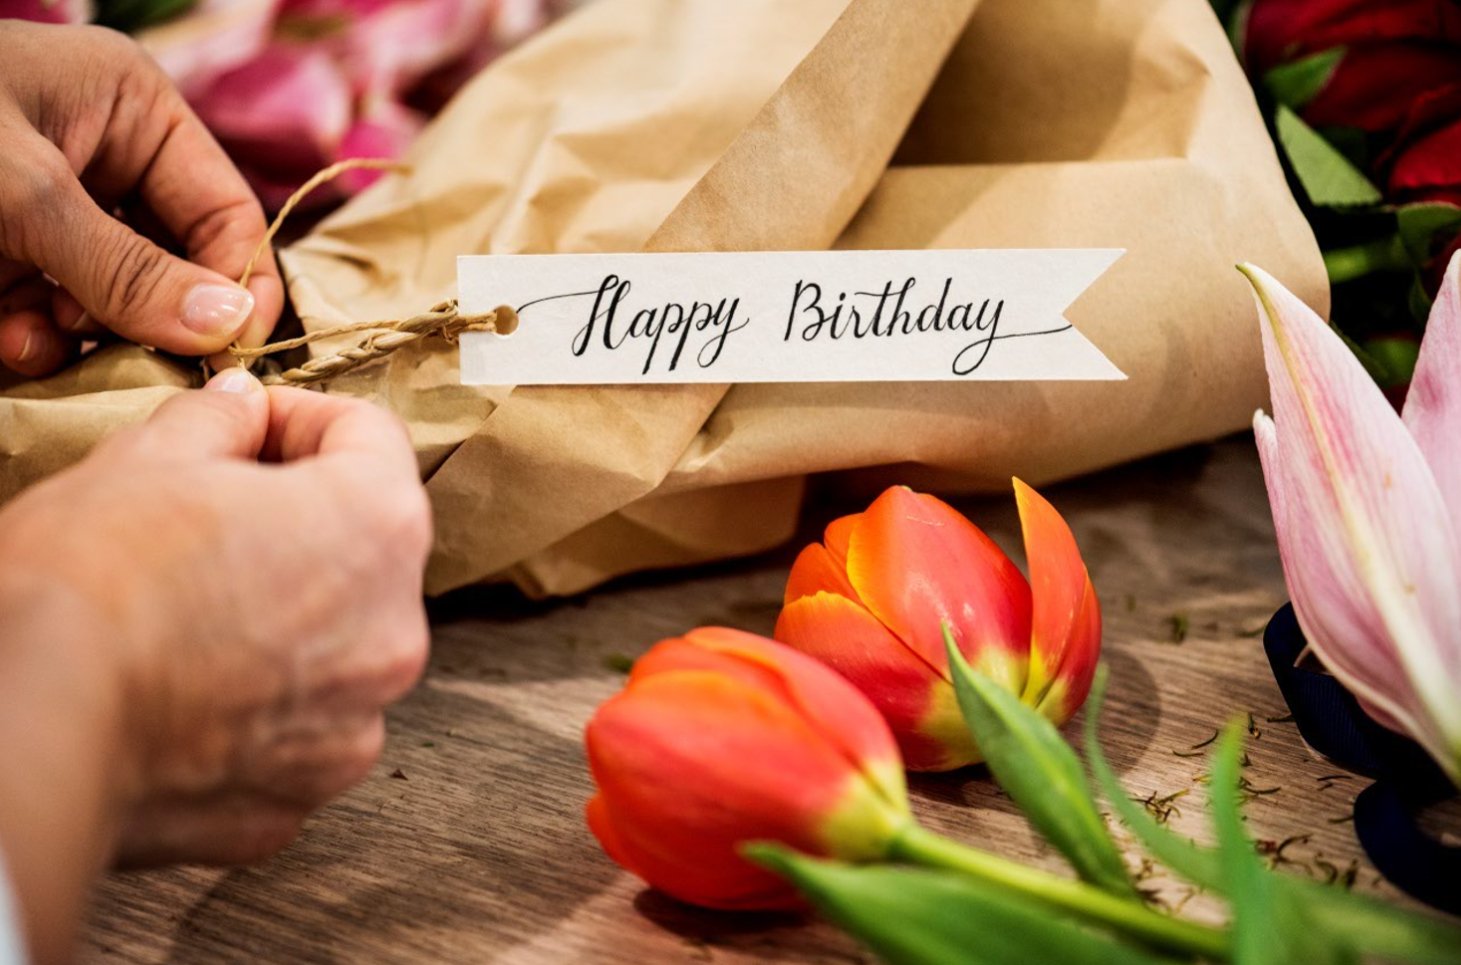 Employee Birthdays: Personal Touch with Flowers in the Workplace Celebrations